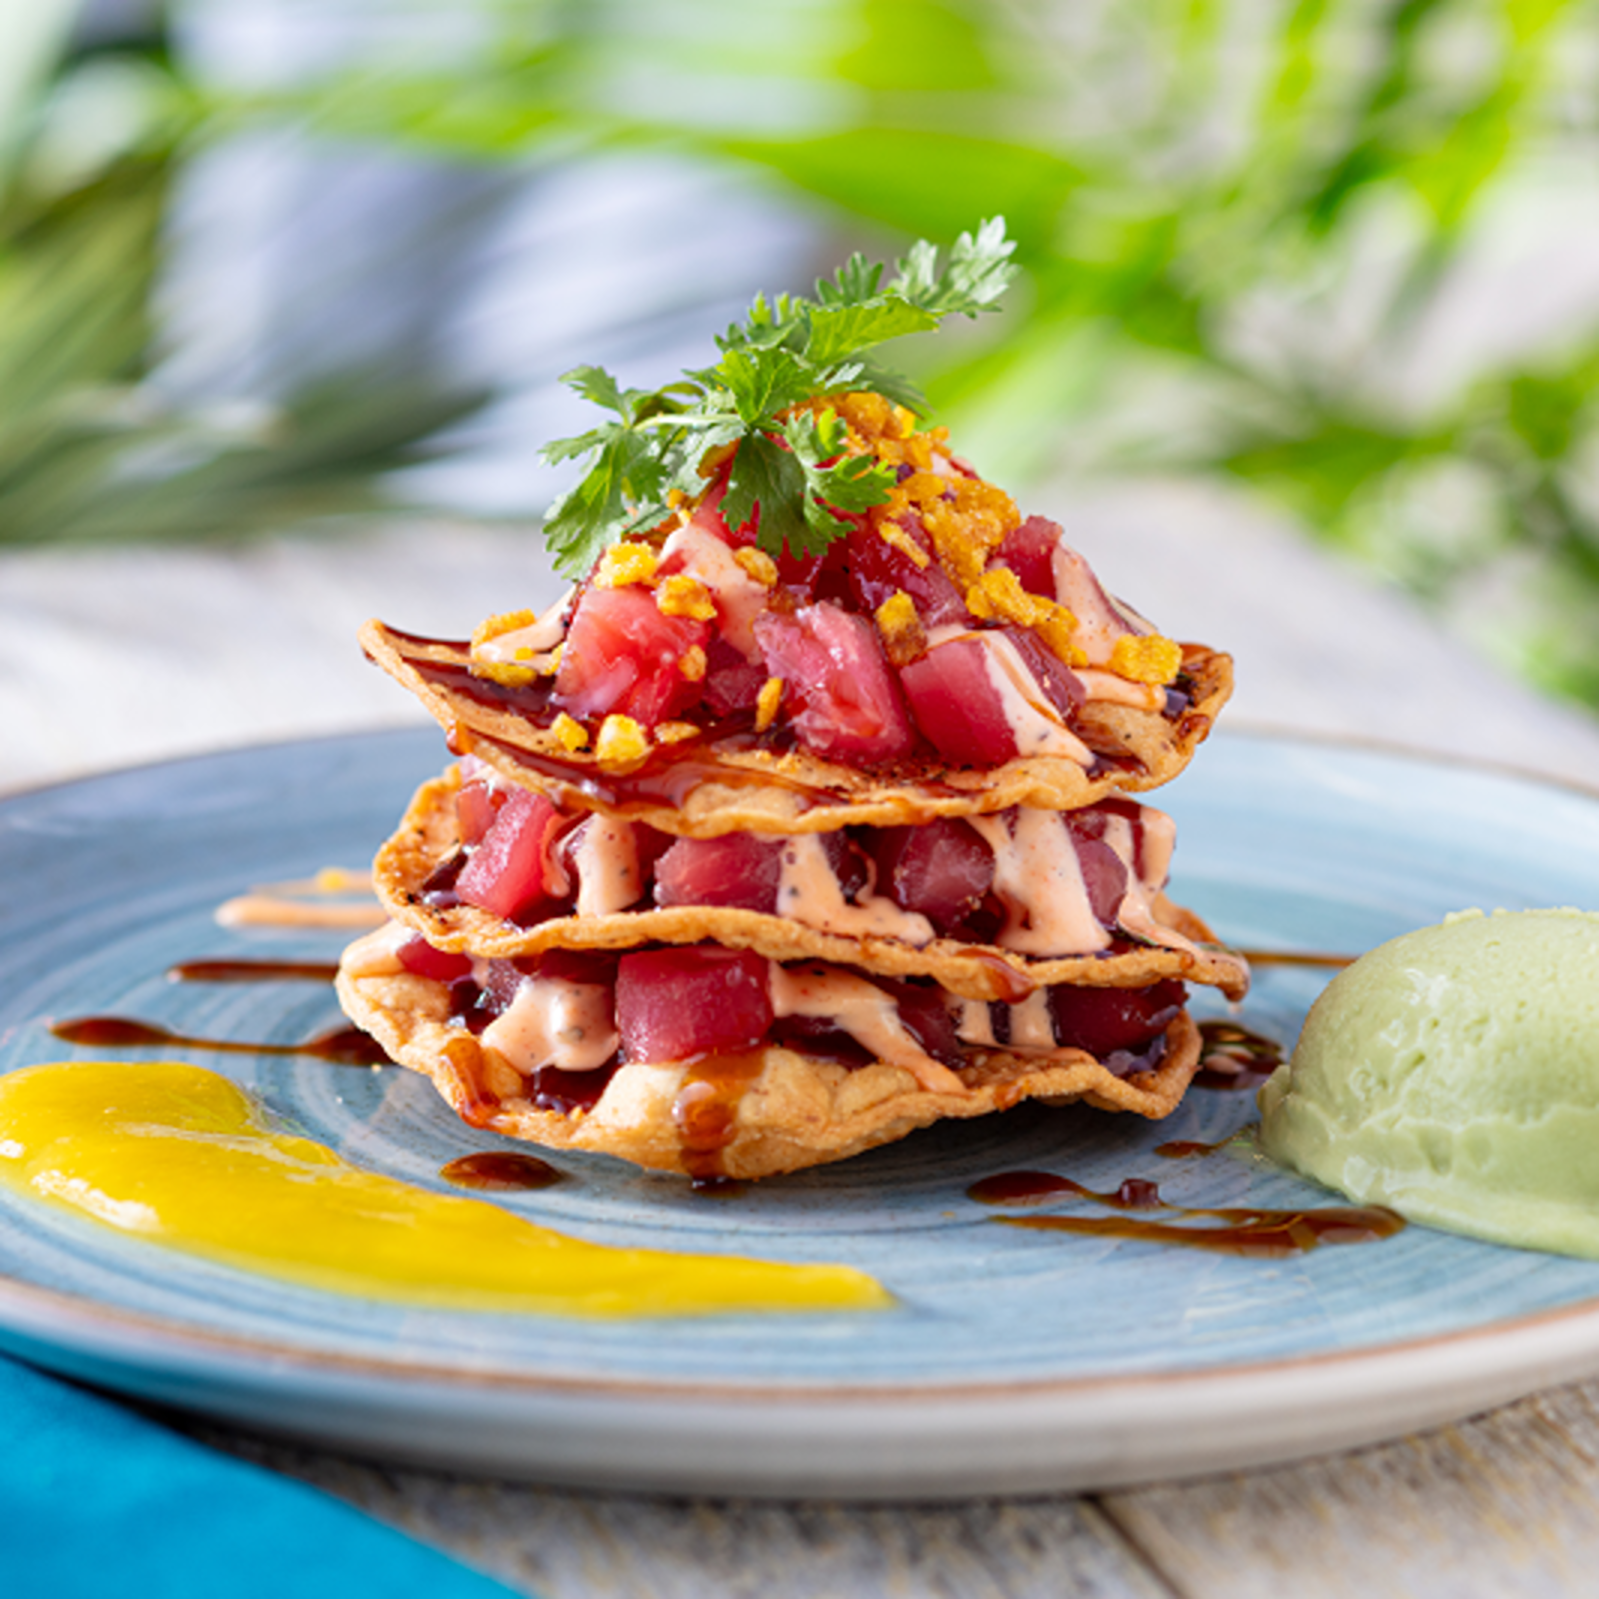 Tuna Tostada Stack - Ahi tuna poke layered with crispy tortillas, drizzled with a zesty lime aioli, served with an avocado lime sorbet.